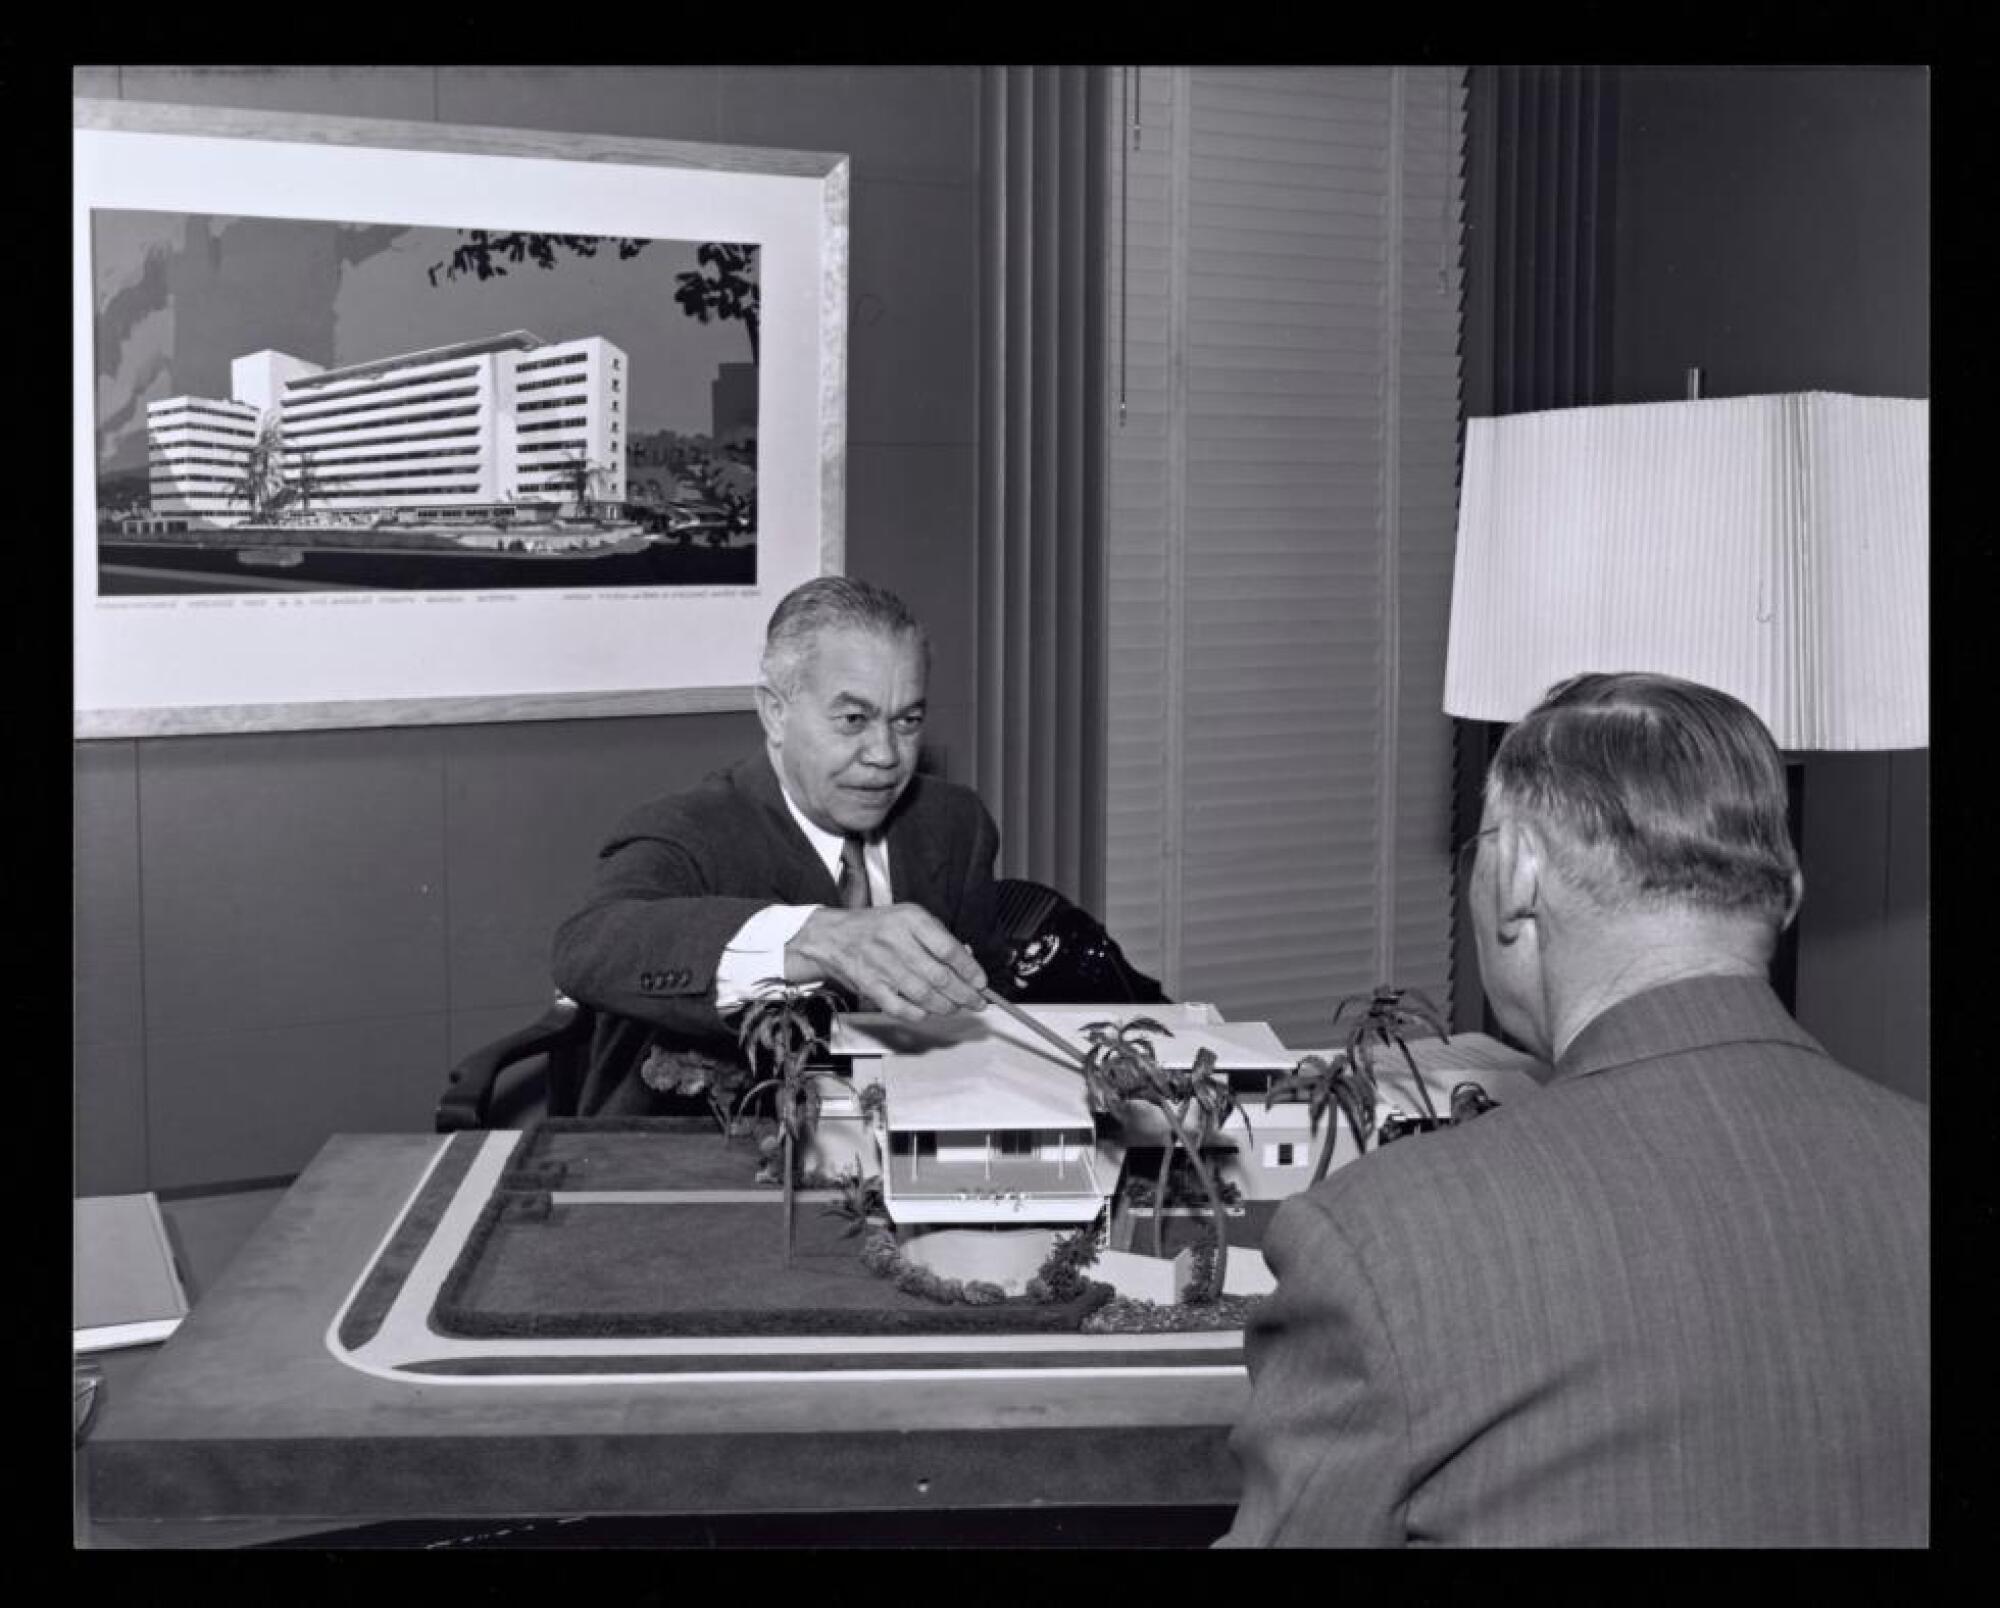 In a black-and-white image, architect Paul Williams points at a model while seated at his desk.